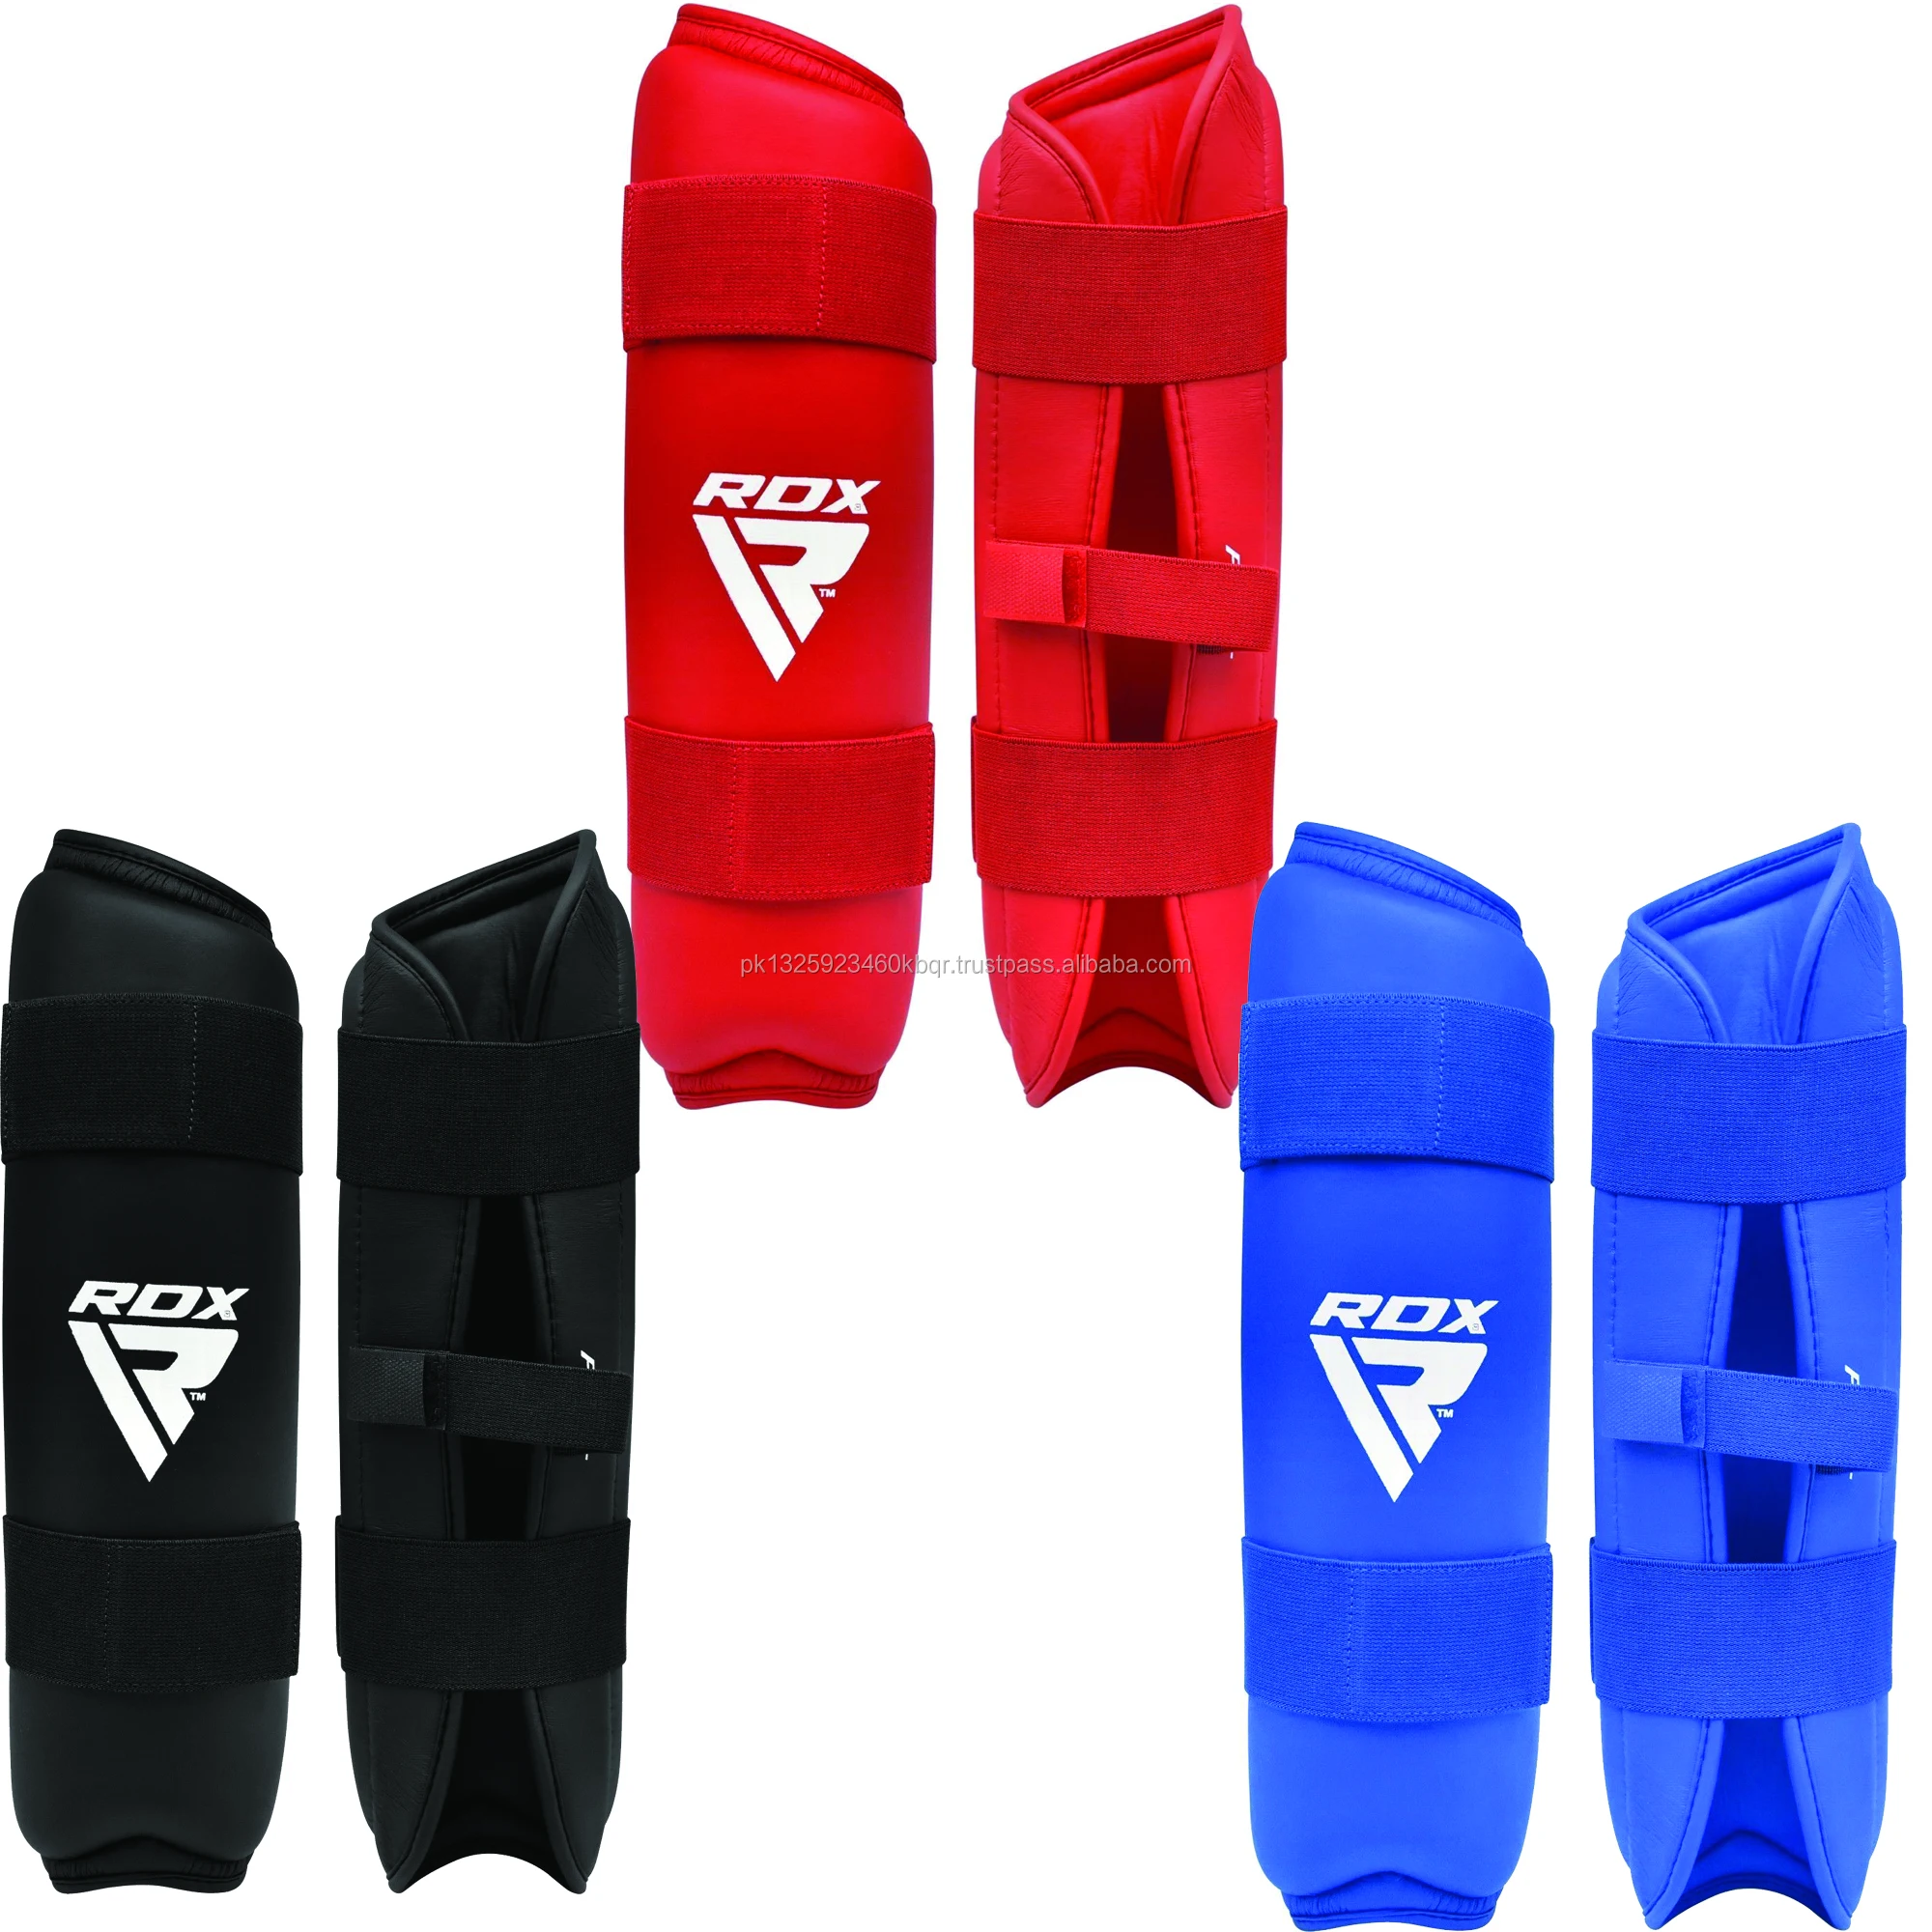 Details about   Taekwondo Foot Pads Protector MMA Sparring Karate Shin Guard Martial Arts UFC 